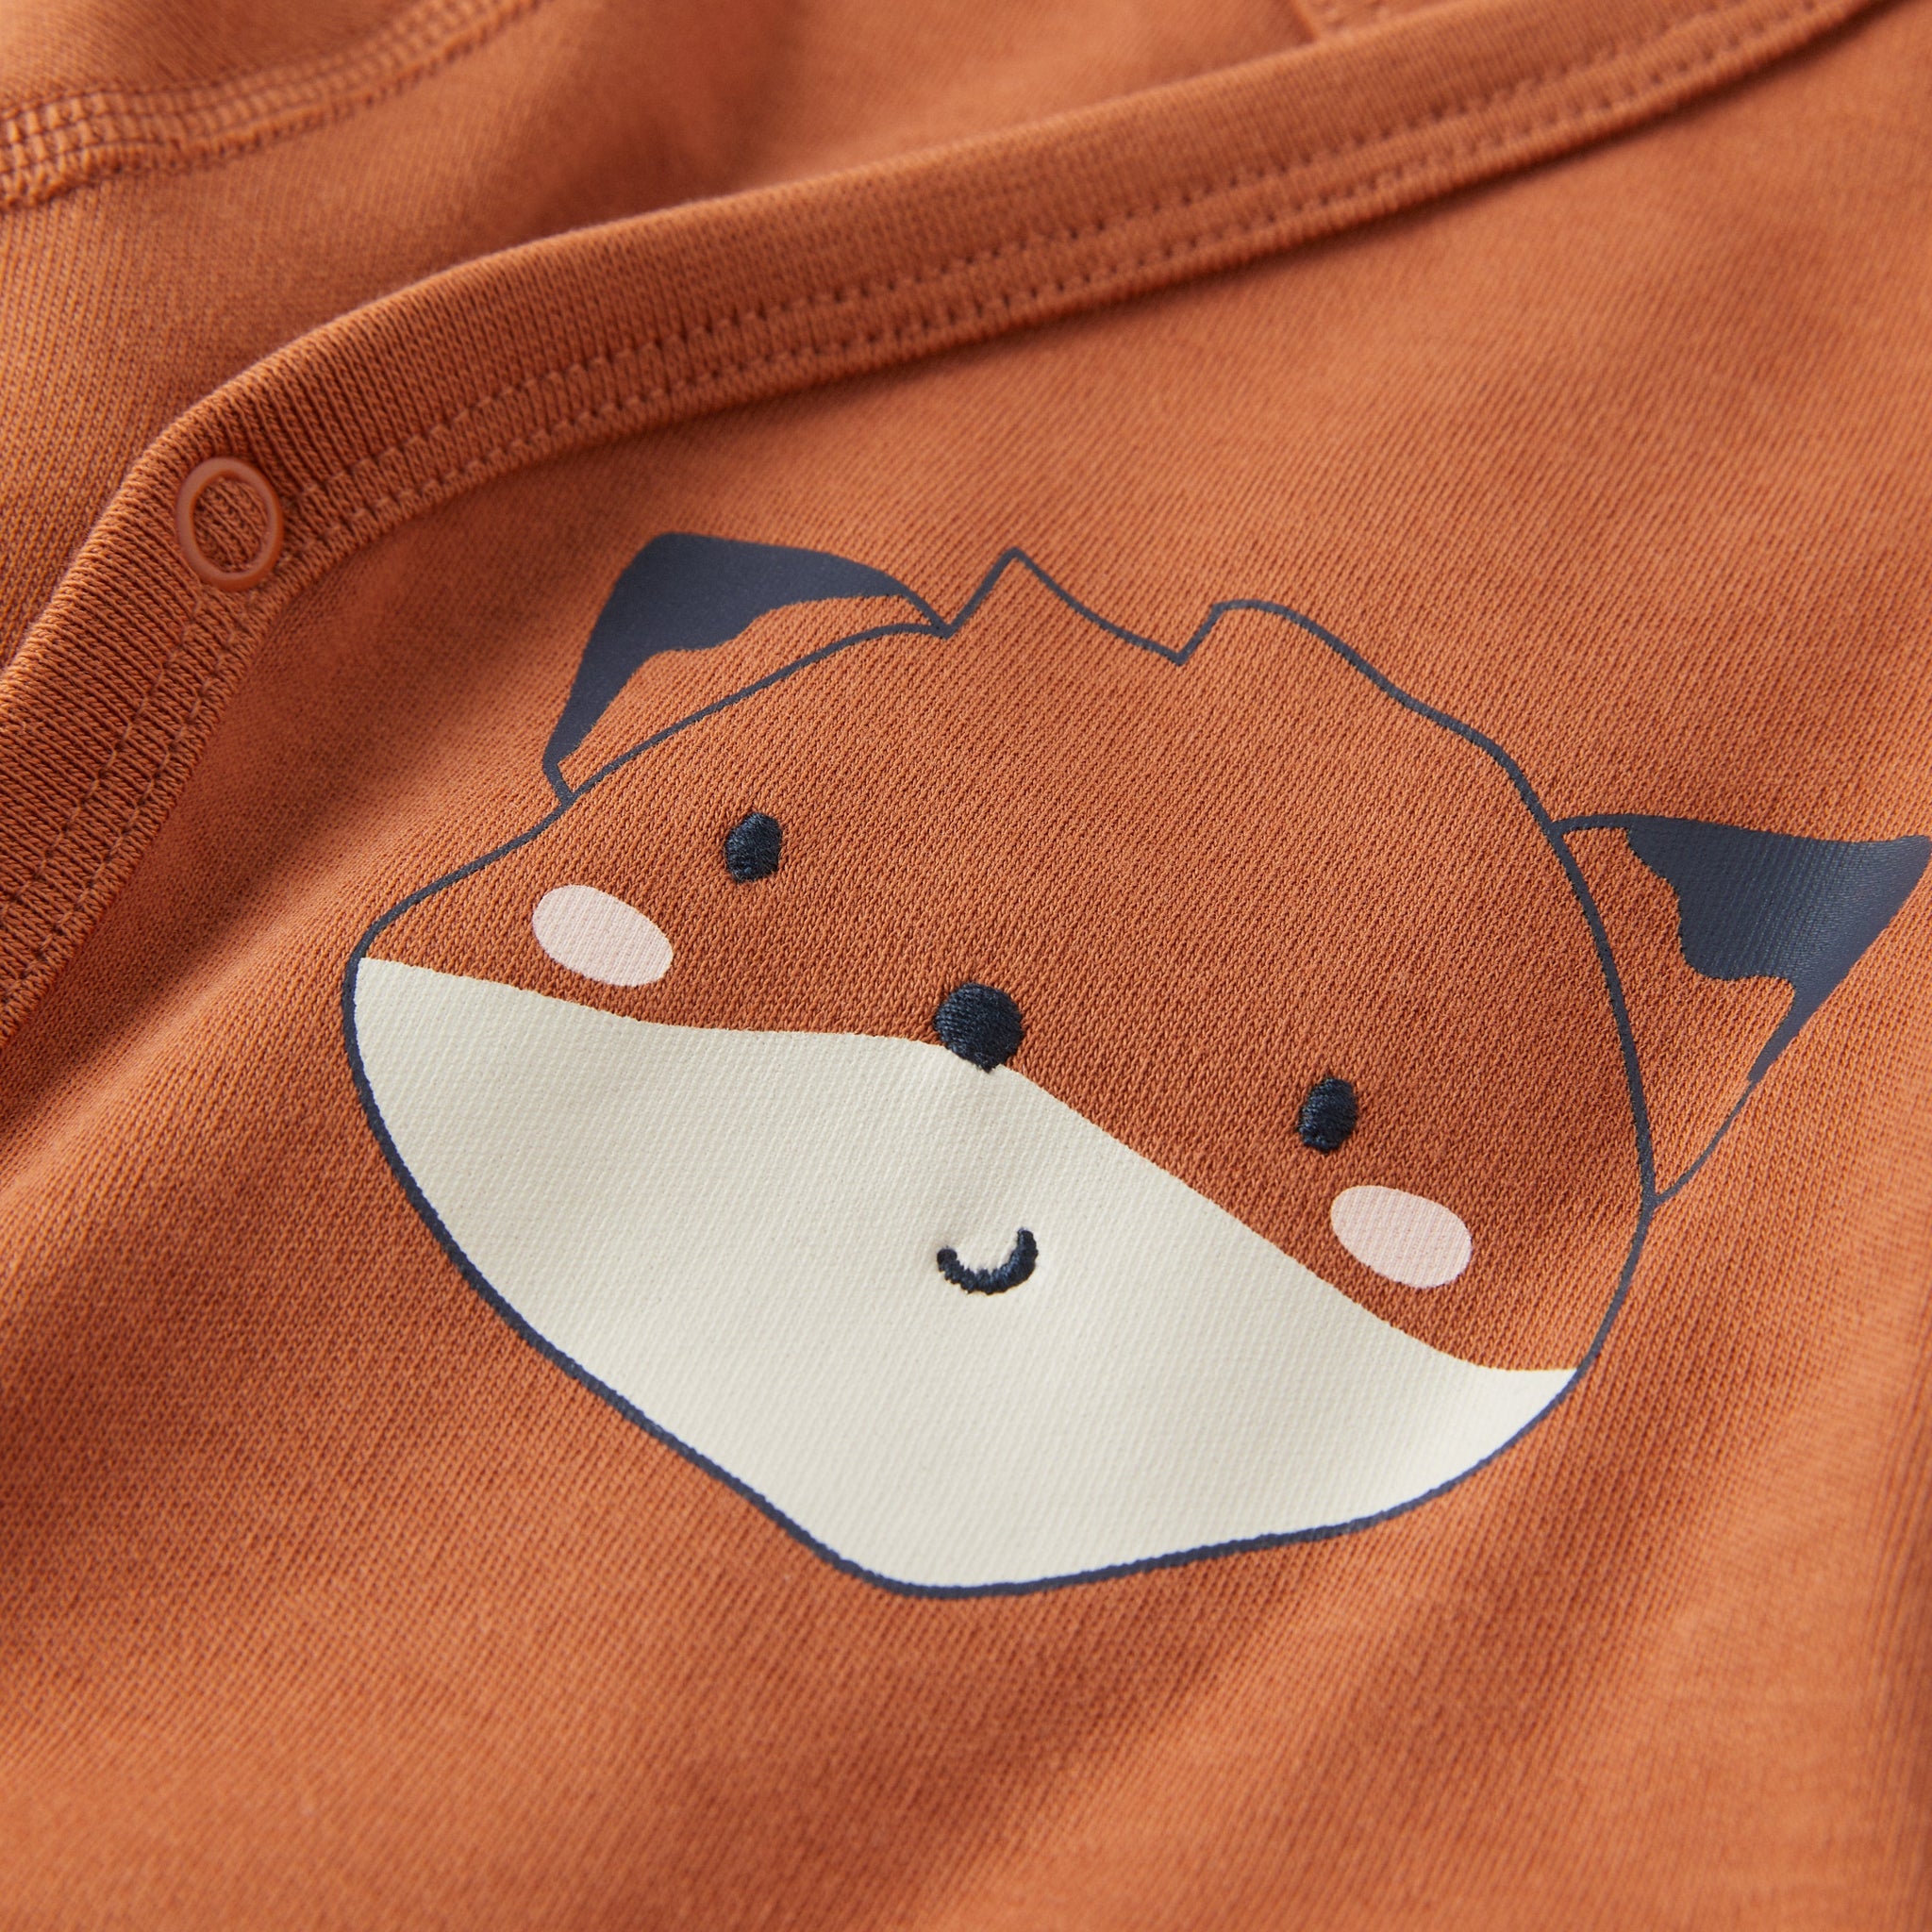 Cotton Orange Wraparound Babygrow from the Polarn O. Pyret babywear collection. Nordic baby clothes made from sustainable sources.